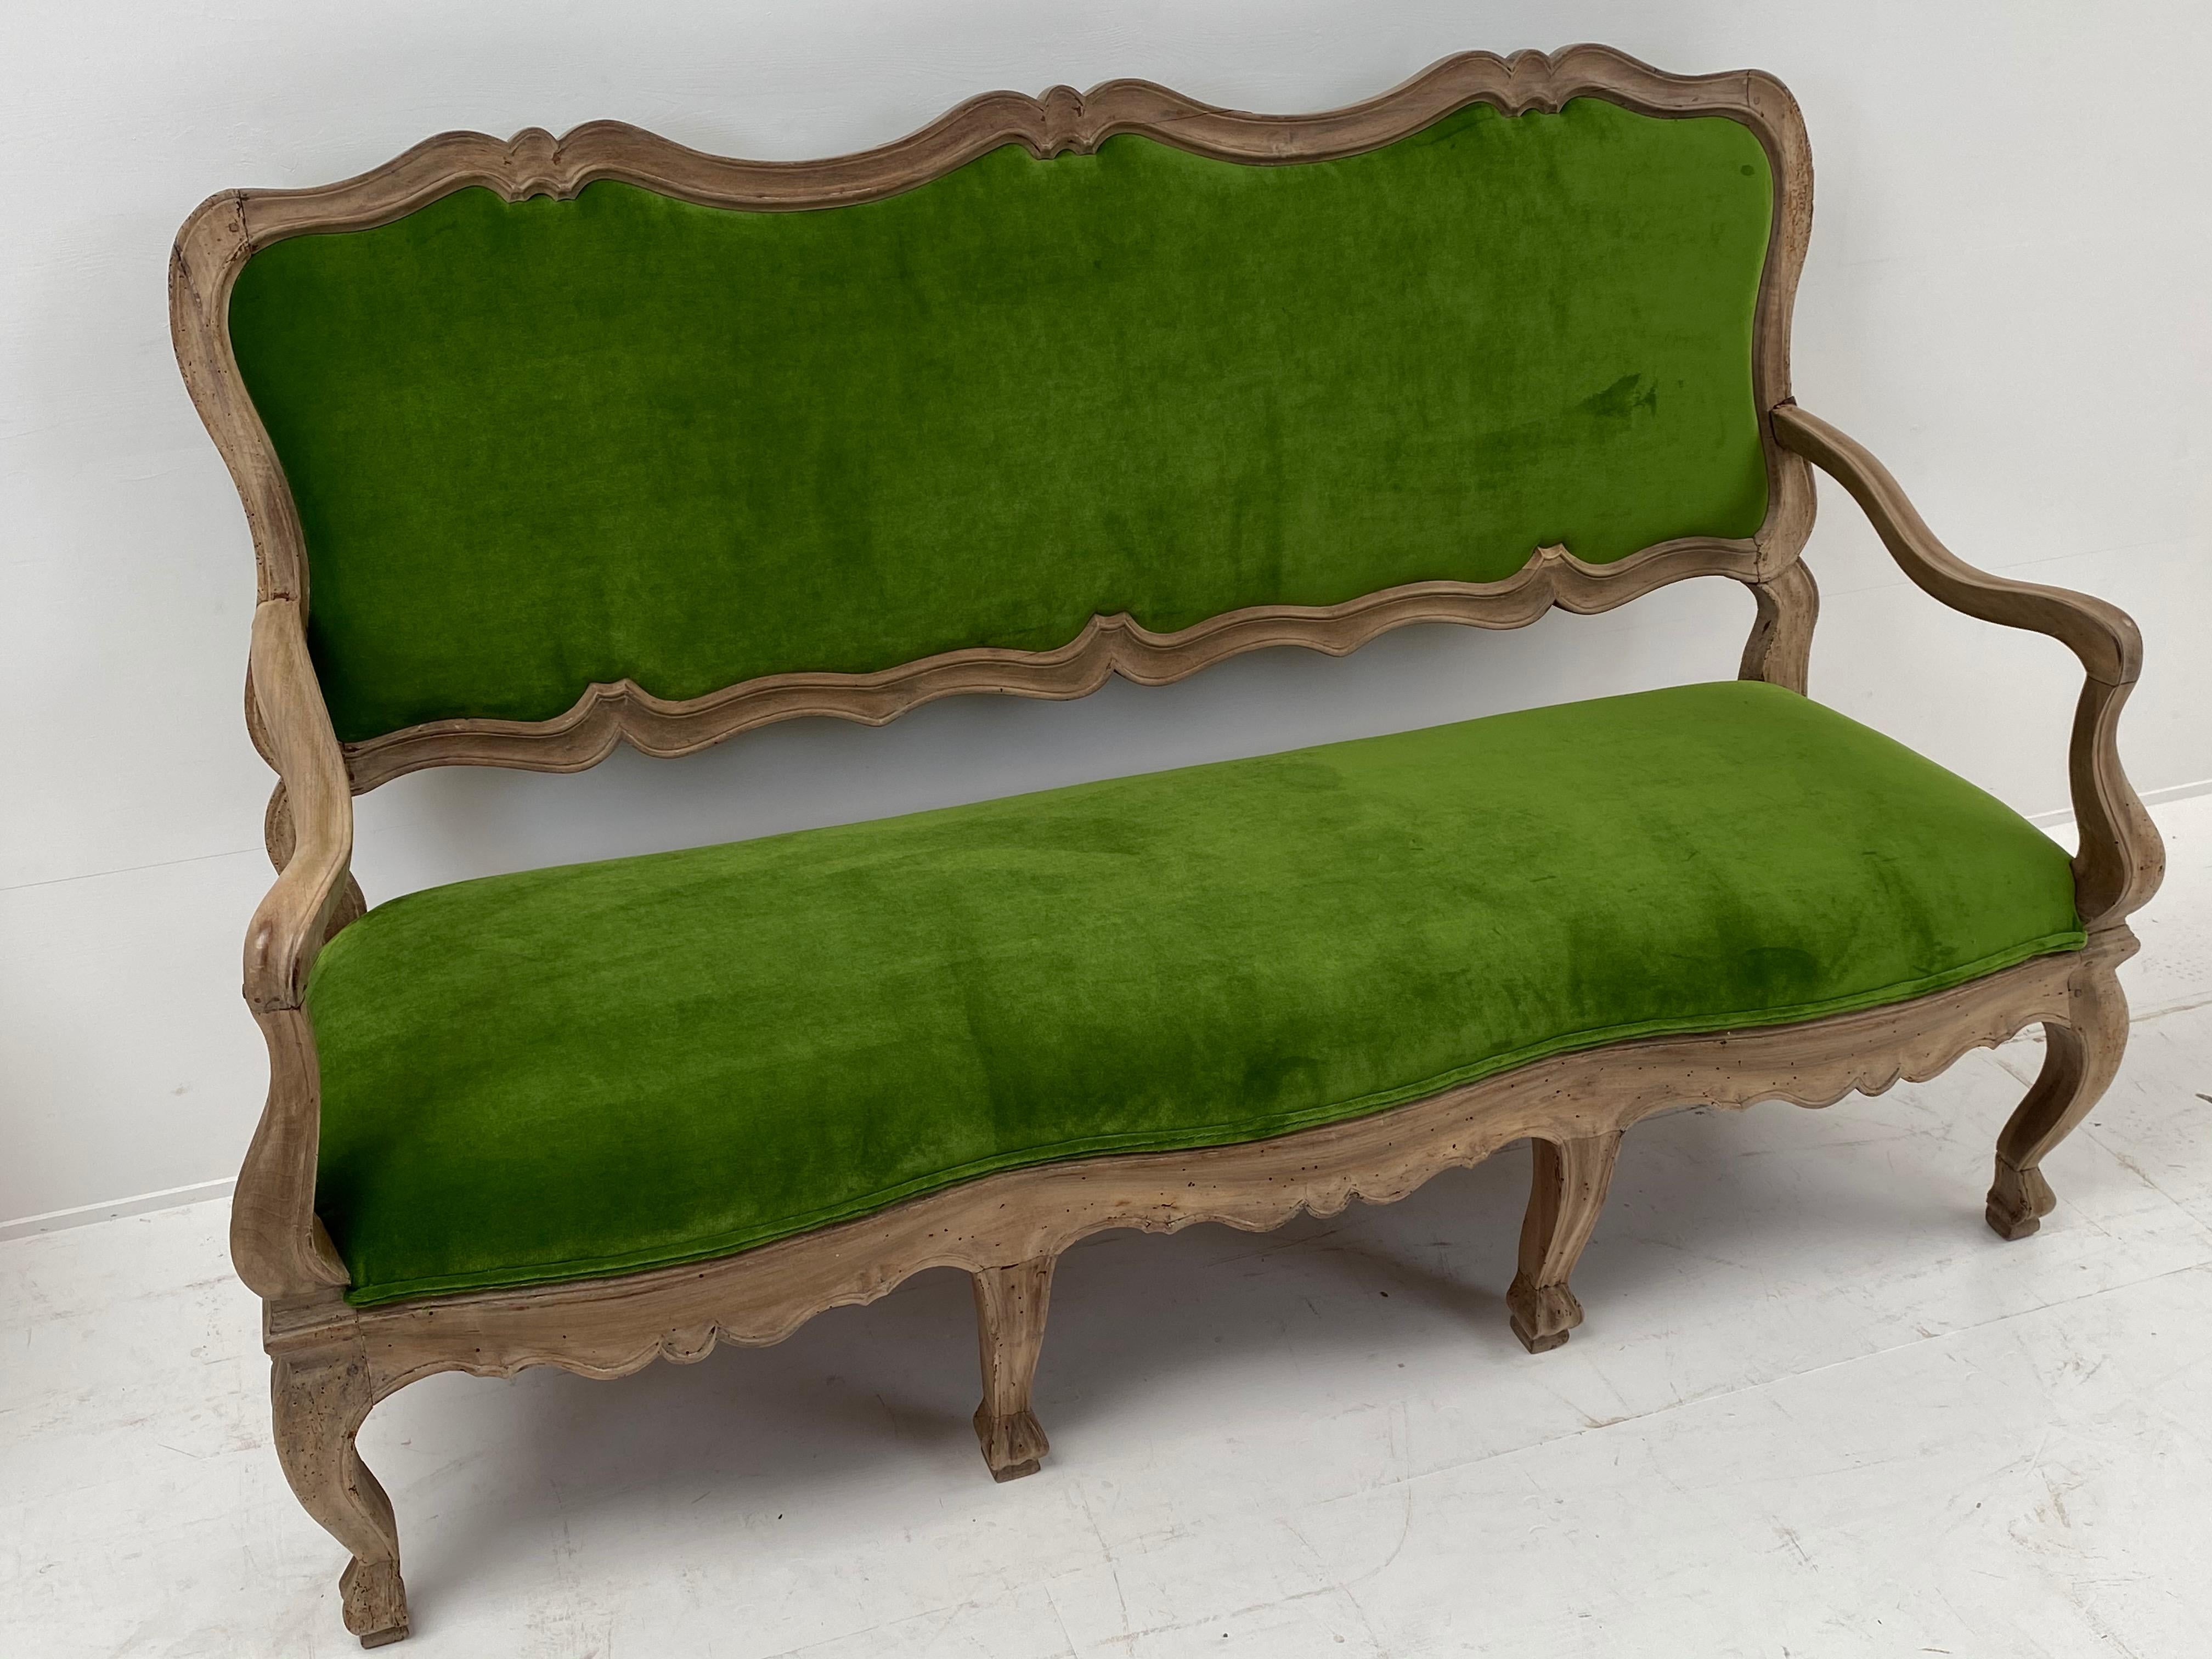 Italian 18th Century Sofa in Walnut In Good Condition For Sale In Schellebelle, BE